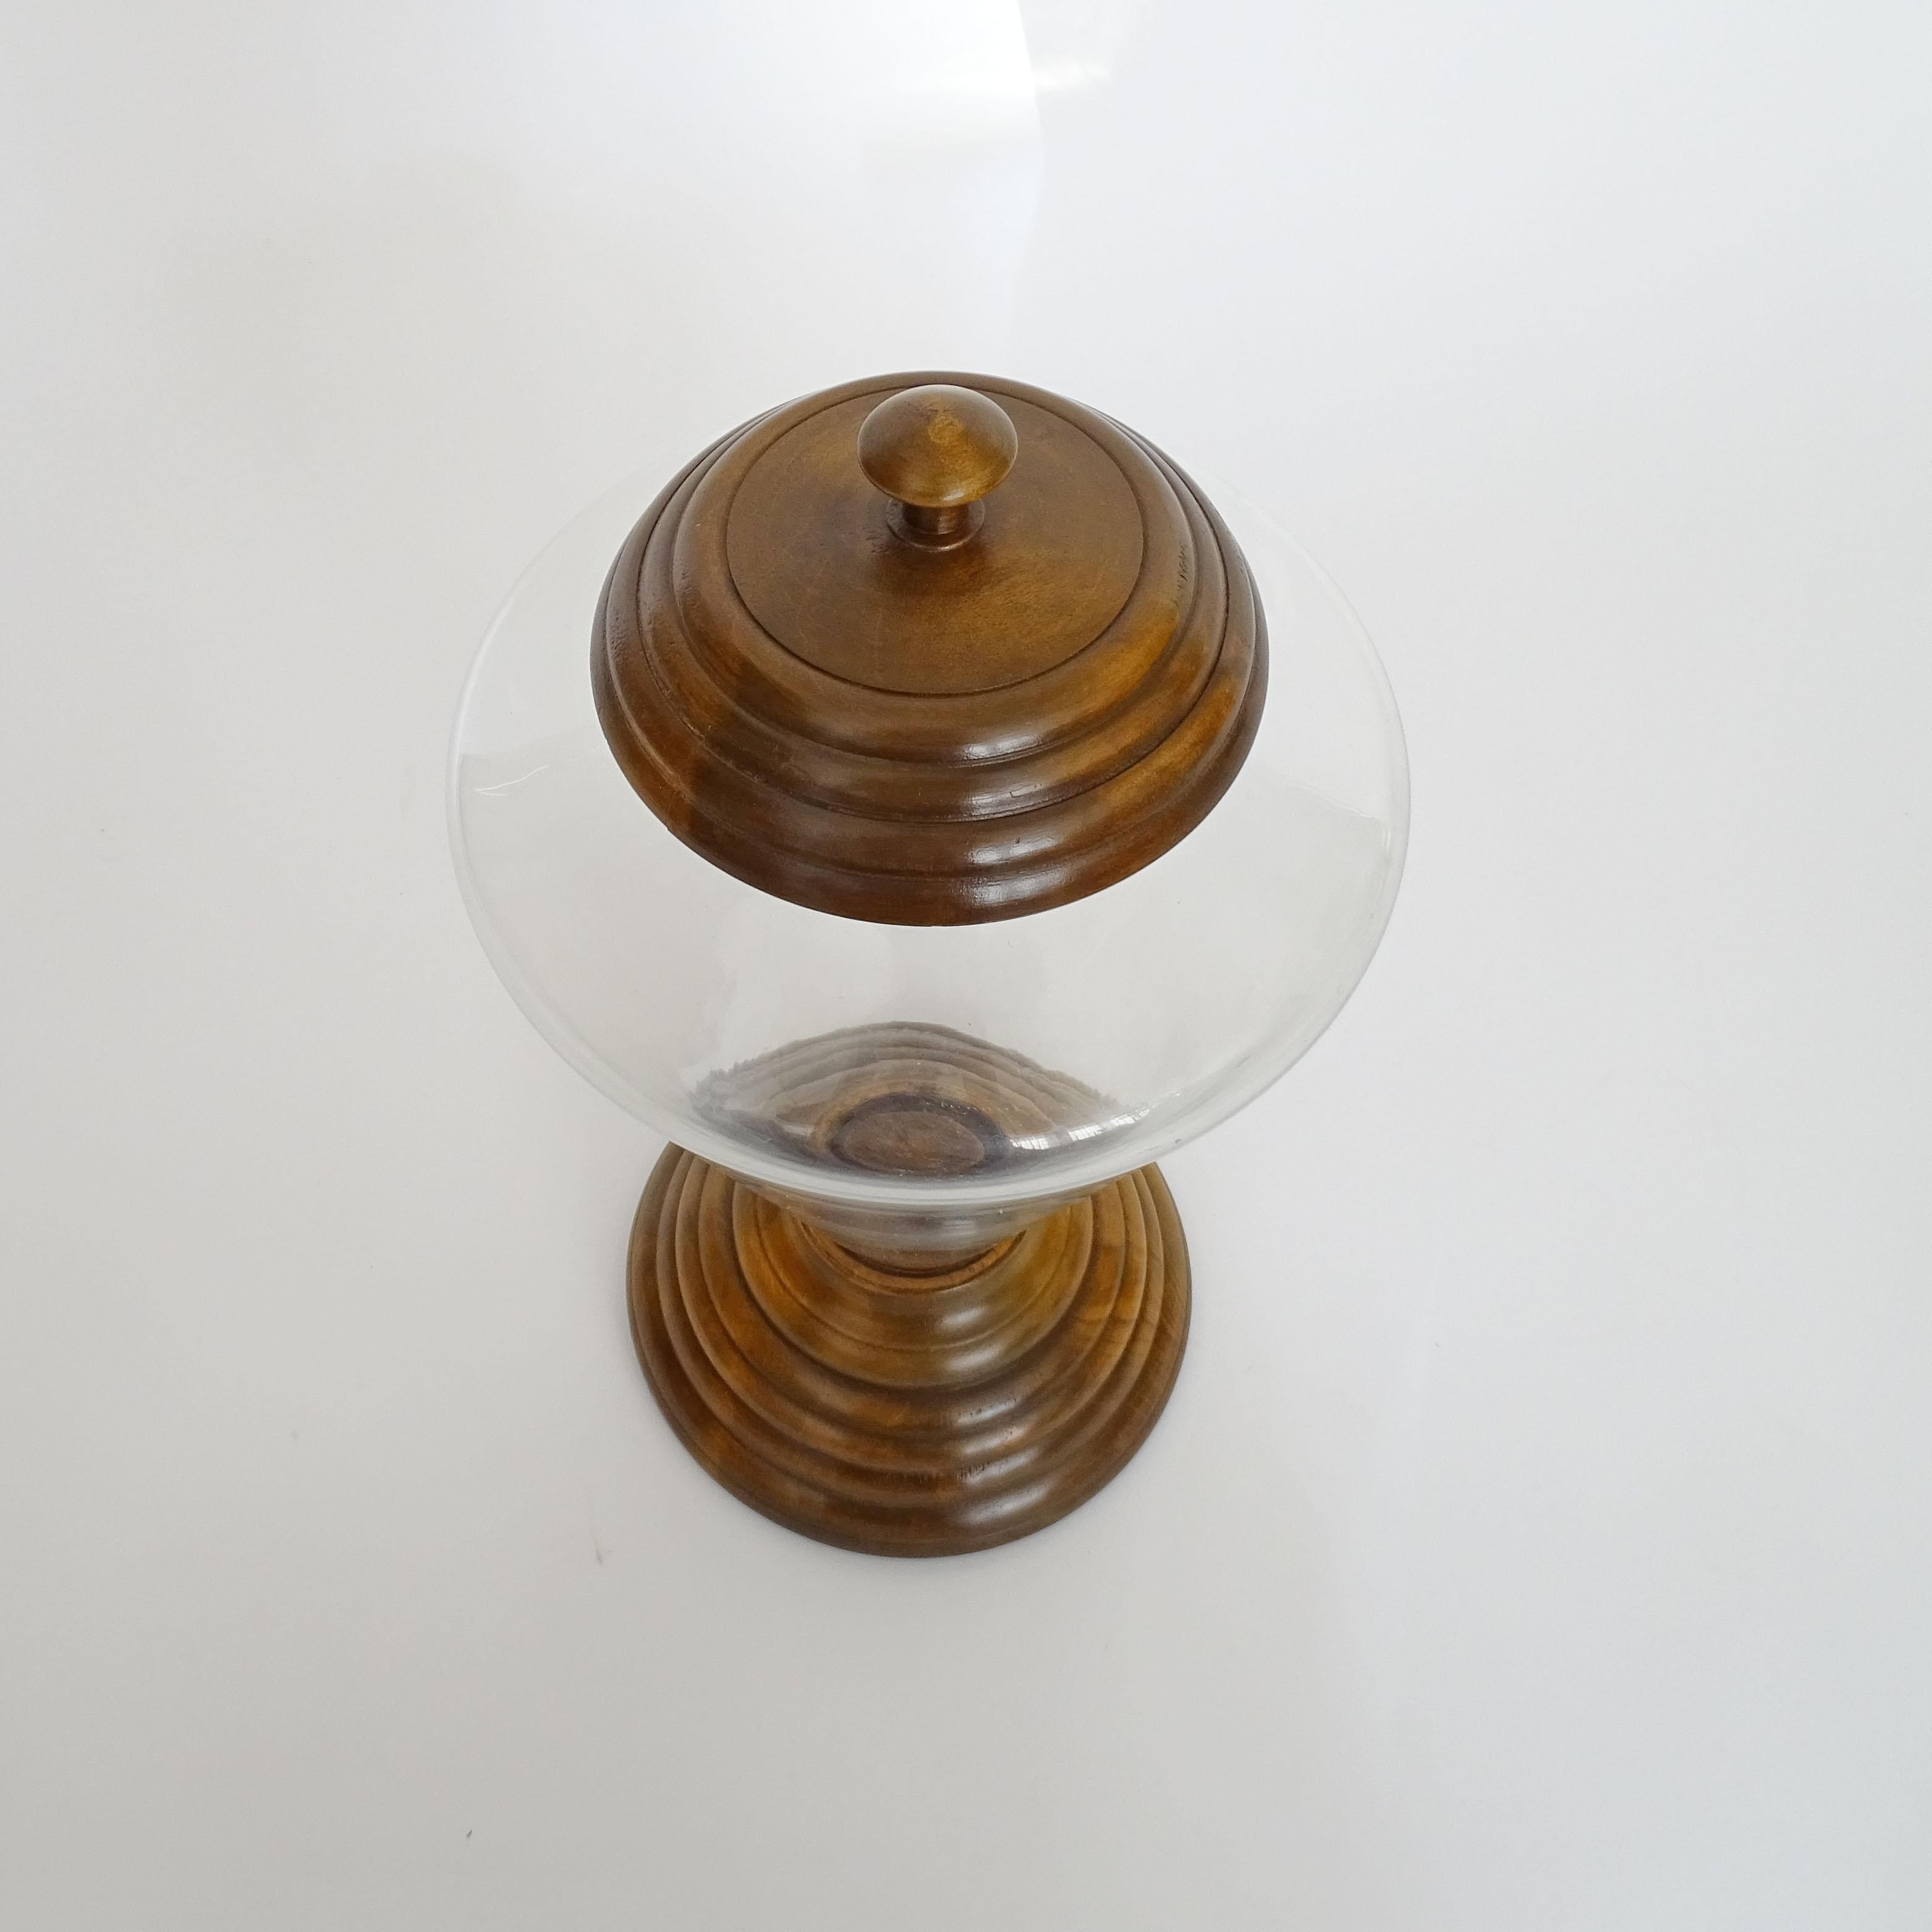 Mid-20th Century Italian Art Deco Candy Jars in Glass and Wood, 1930s For Sale